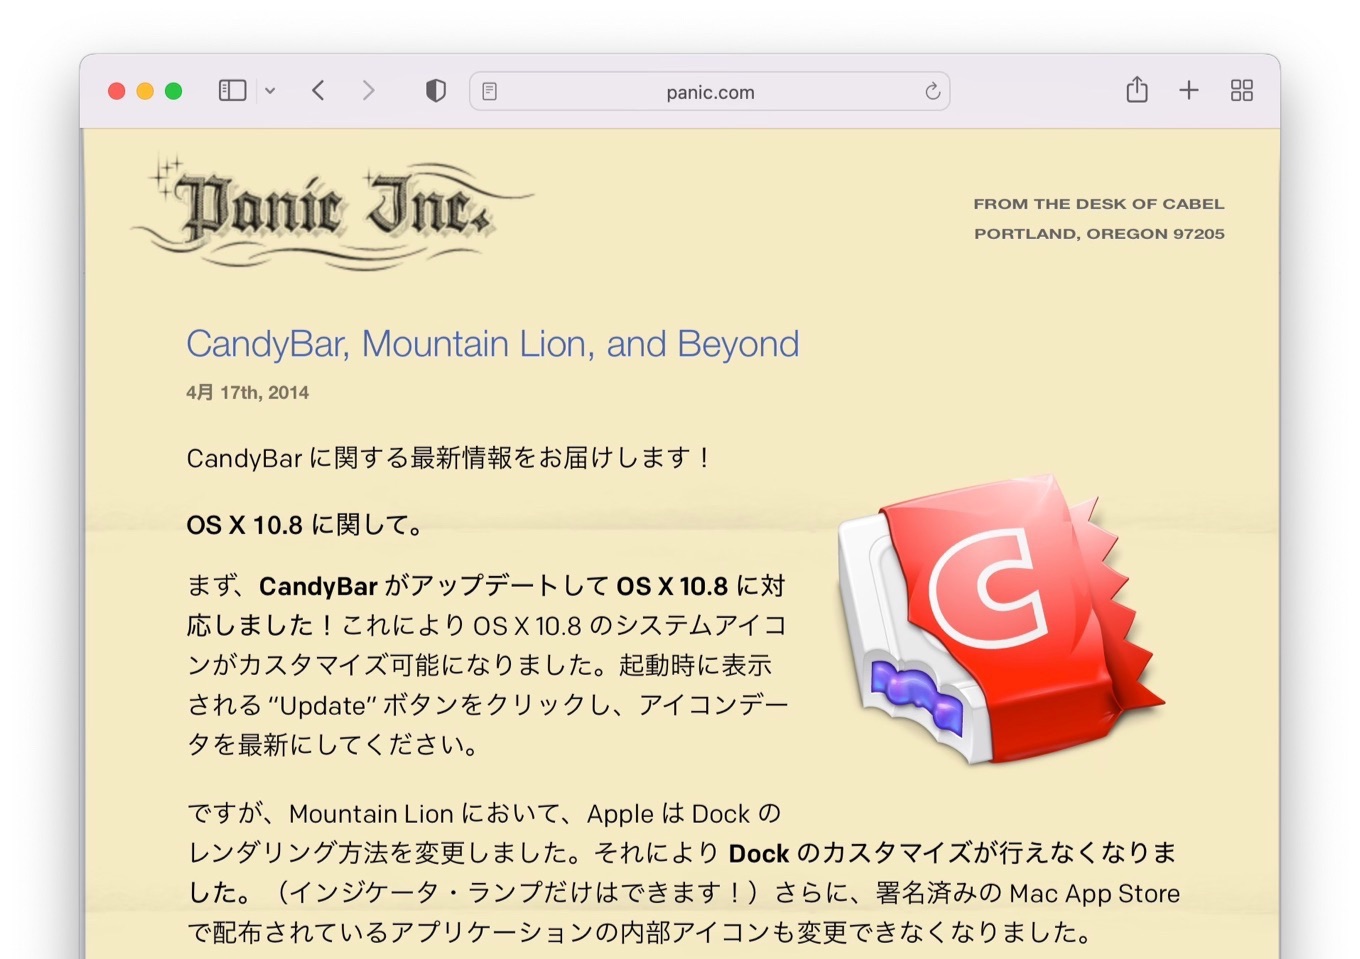 CandyBar, Mountain Lion, and Beyond by Panic